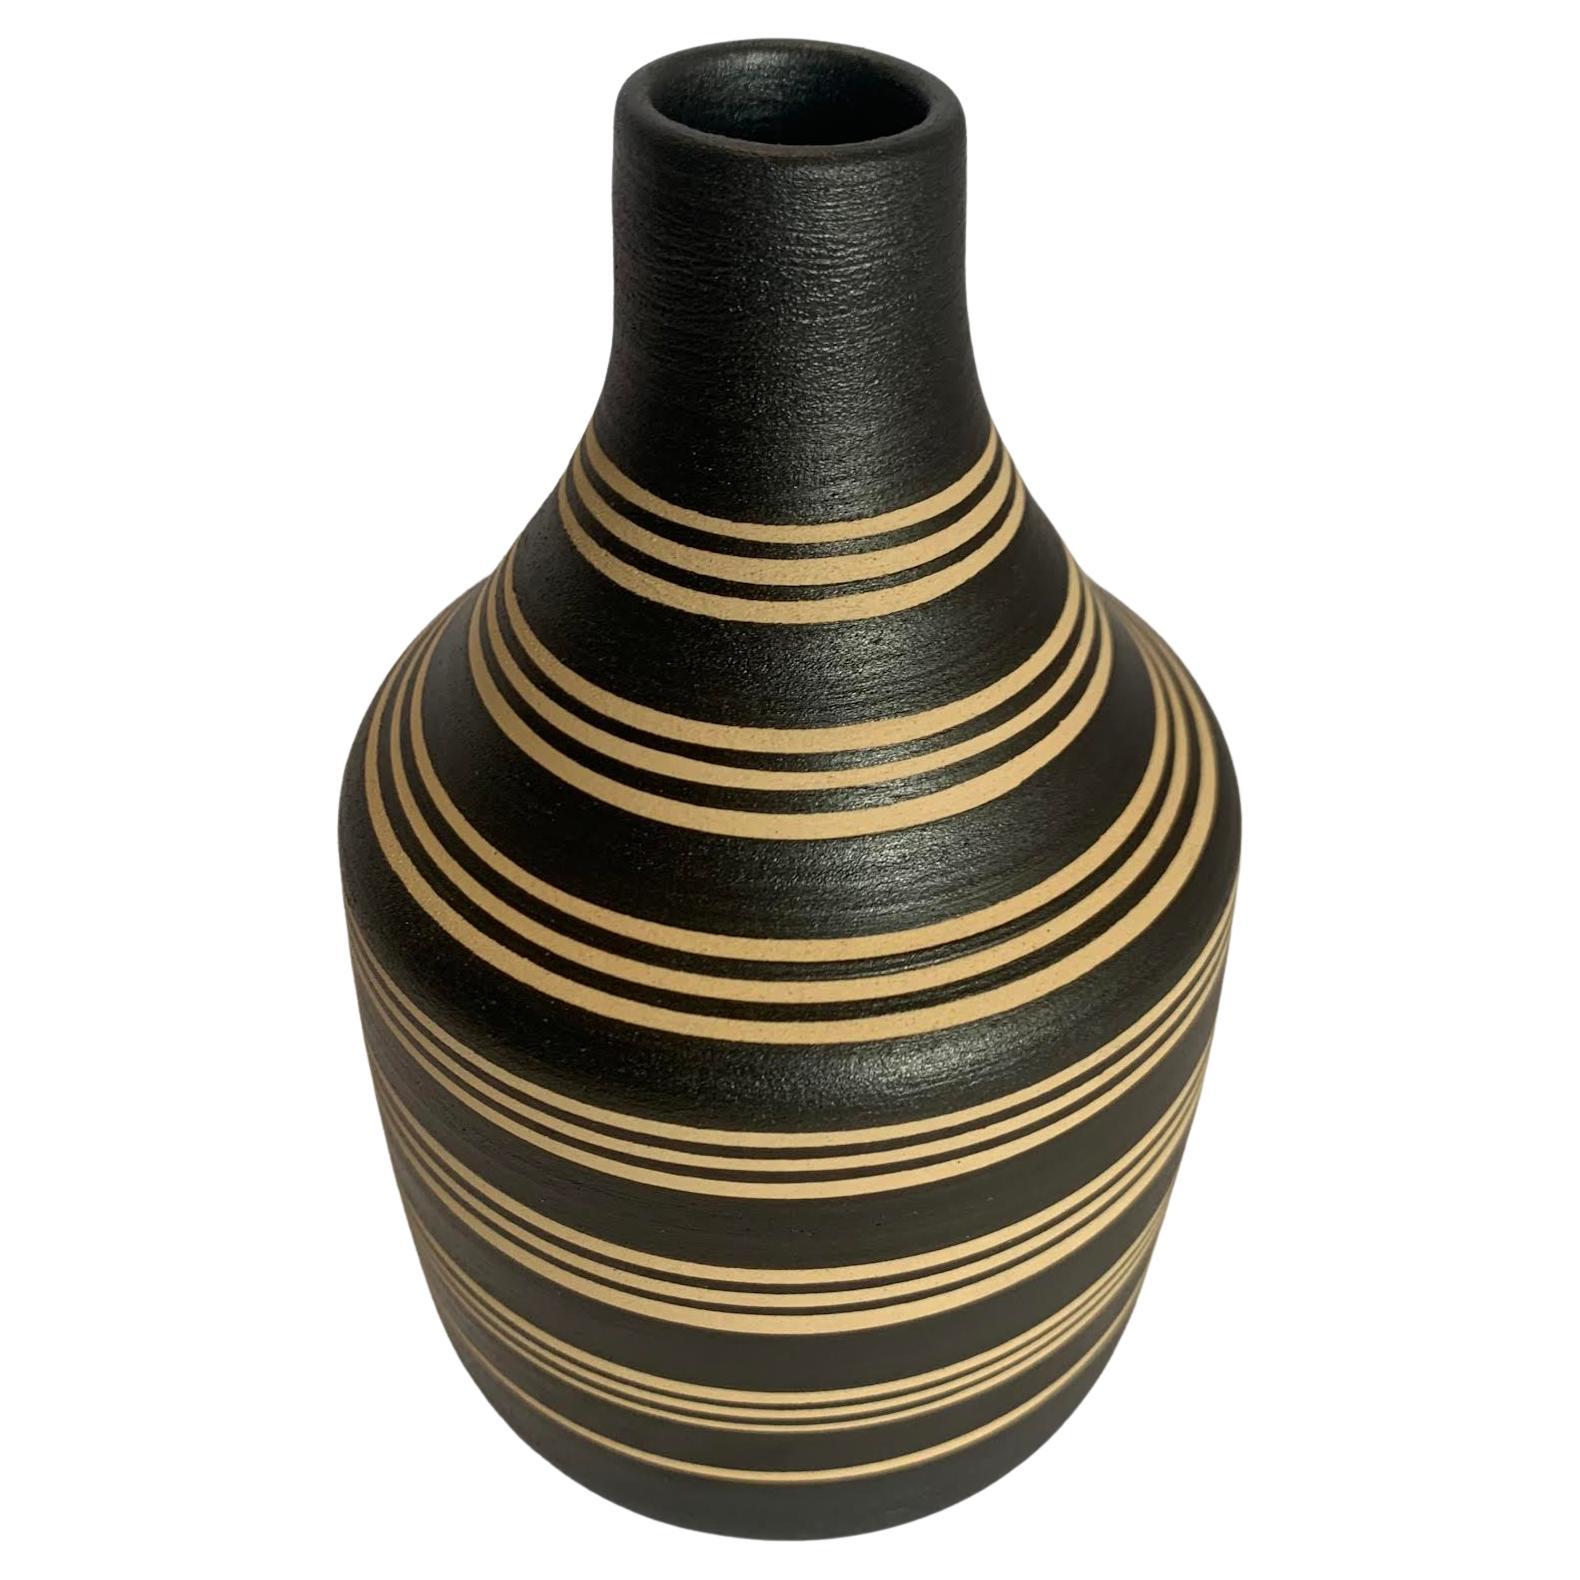 Contemporary Turkish handmade black and cream triple band stripe vase.
Can hold water.
Two available.
From a large collection.